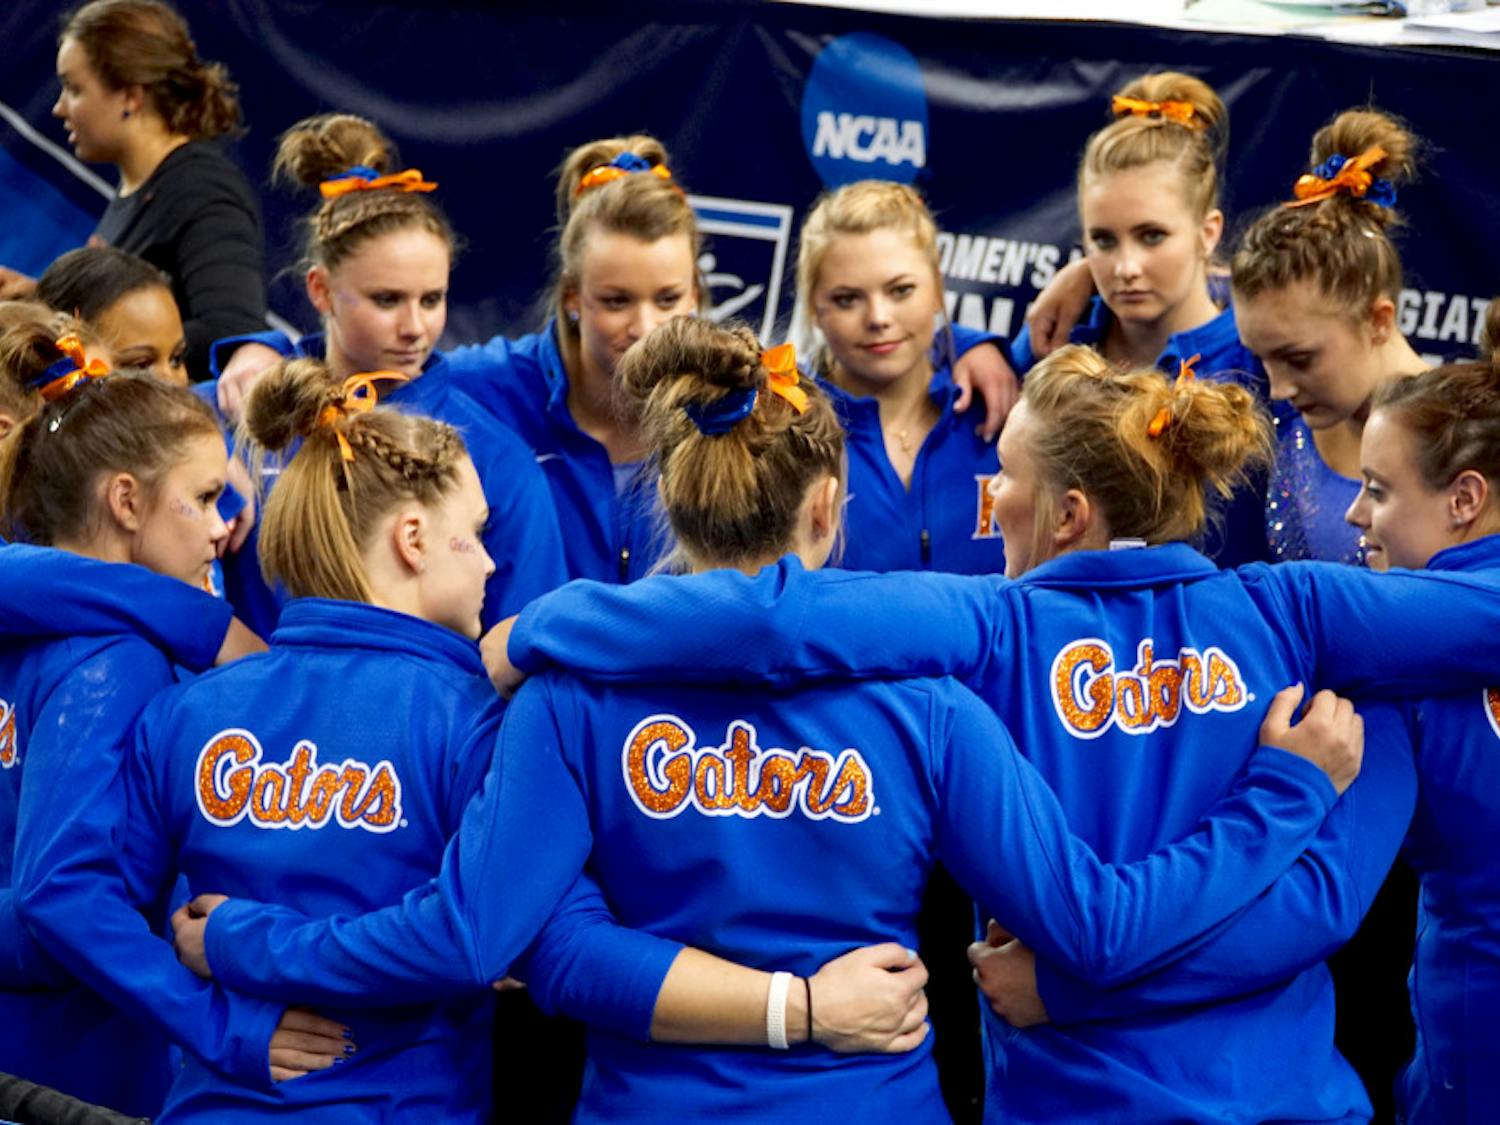 The Florida gymnastics team huddles after finishing fourth at the NCAA Gymnastics Super Six on April 16, 2016, in Fort Worth, Texas.